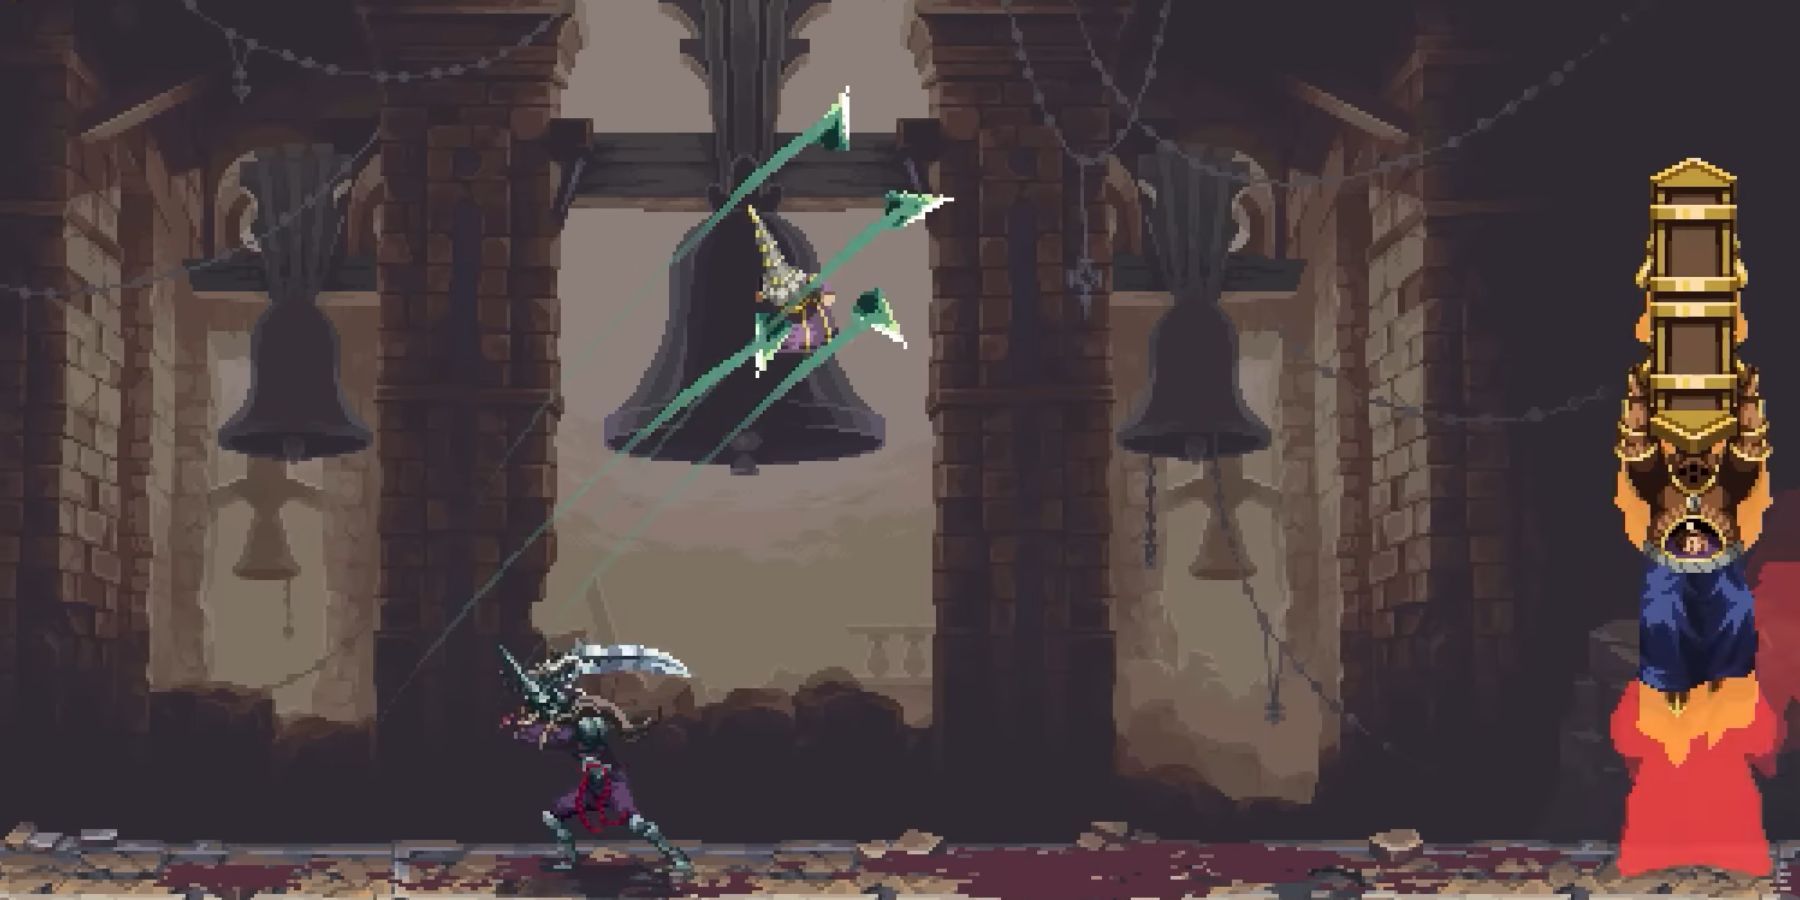 Blasphemous 2 release date set for Nintendo Switch later this year